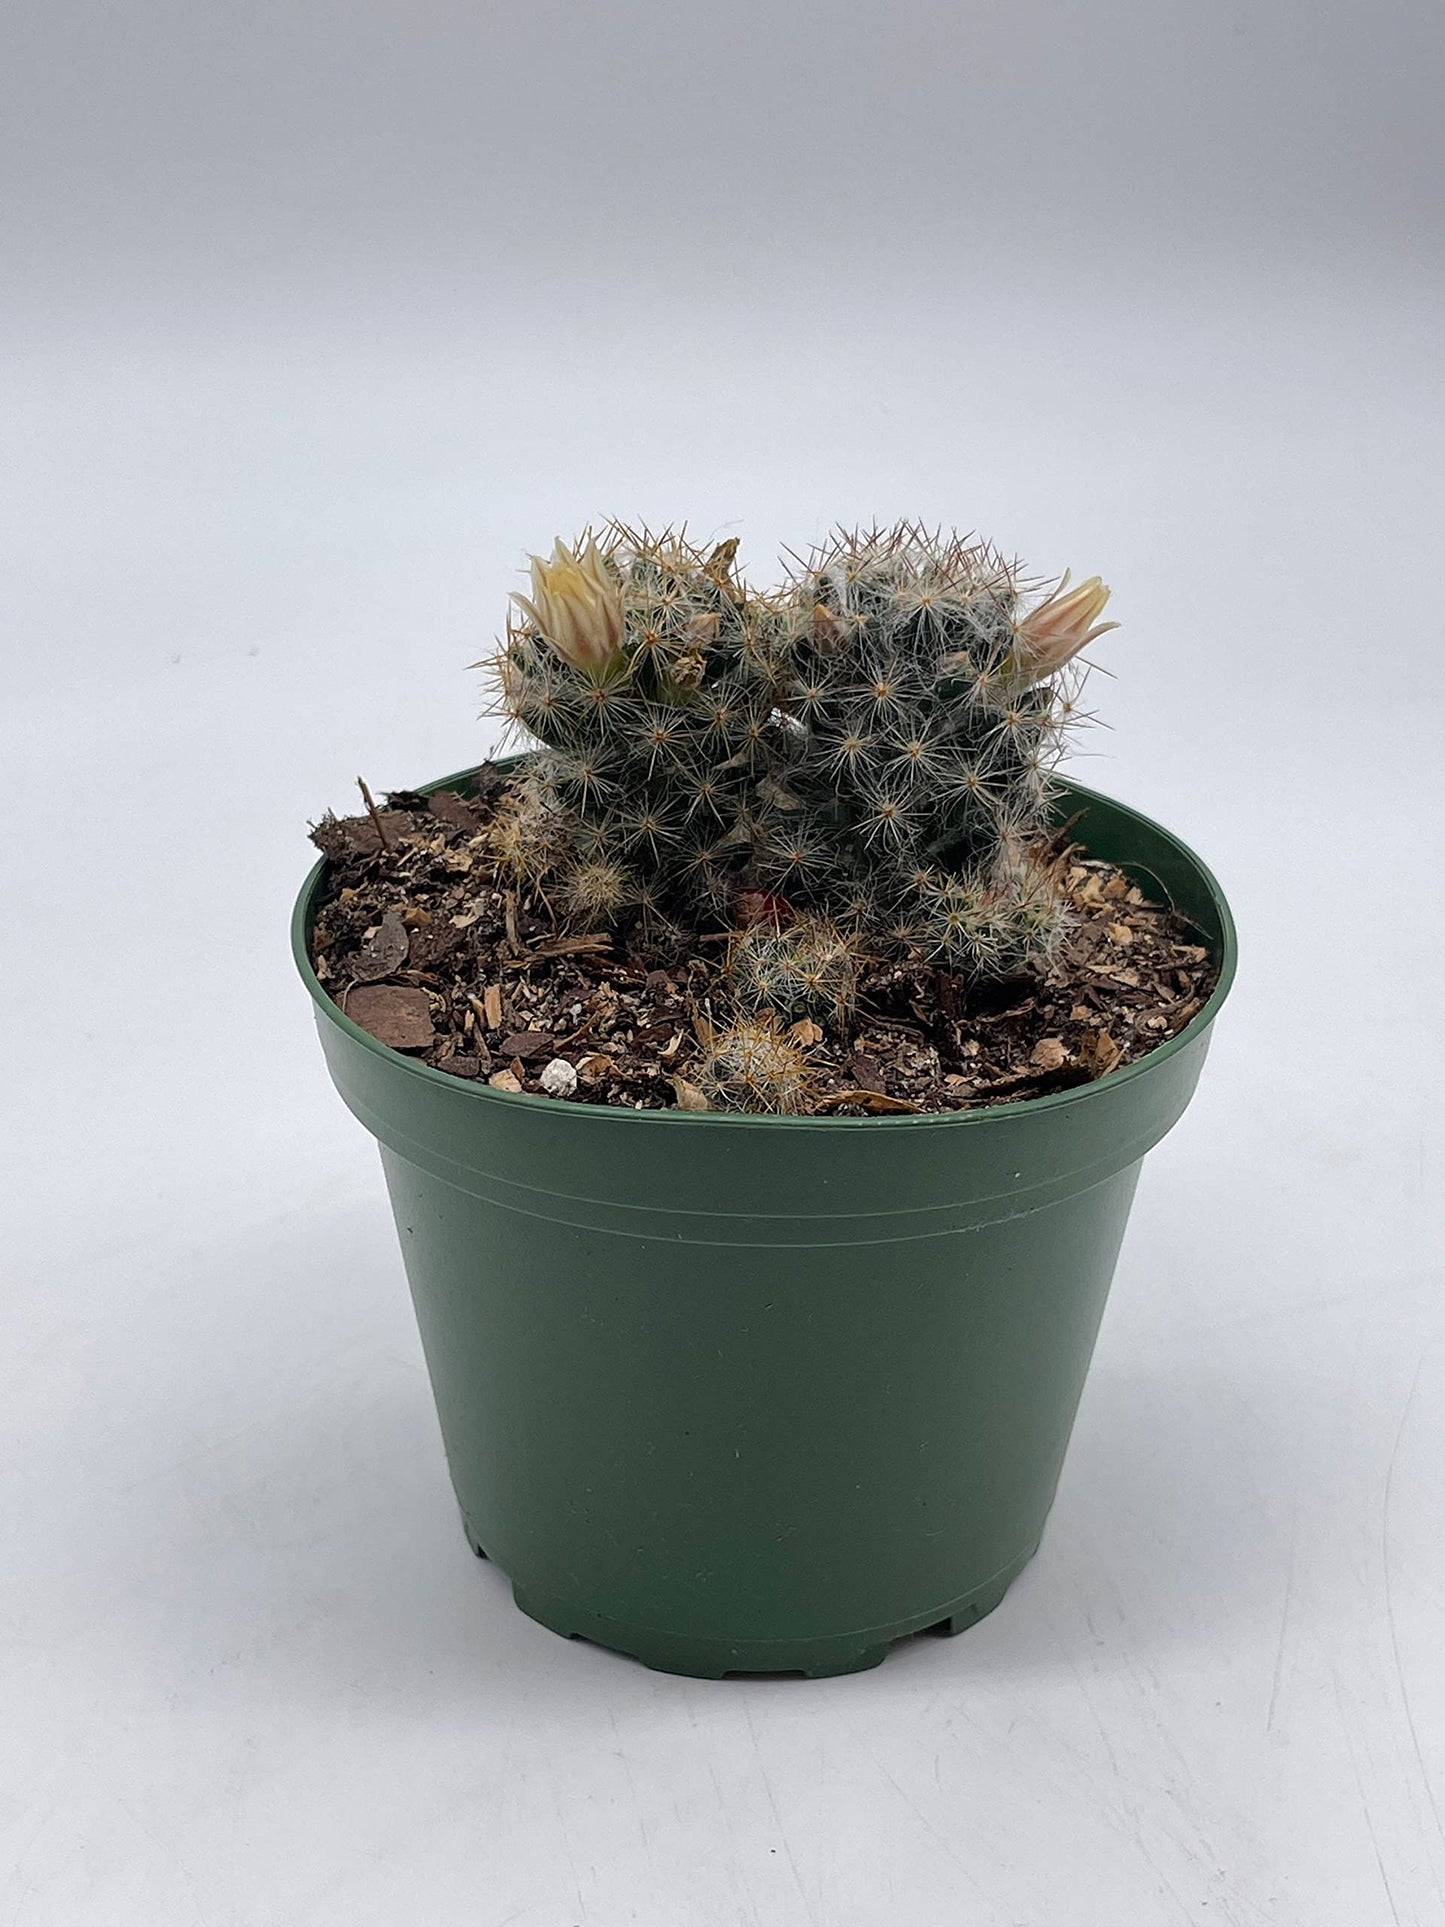 Mammillaria prolifera, Little Candle, Rare Cactus, 4 inch Pot, Well Rooted